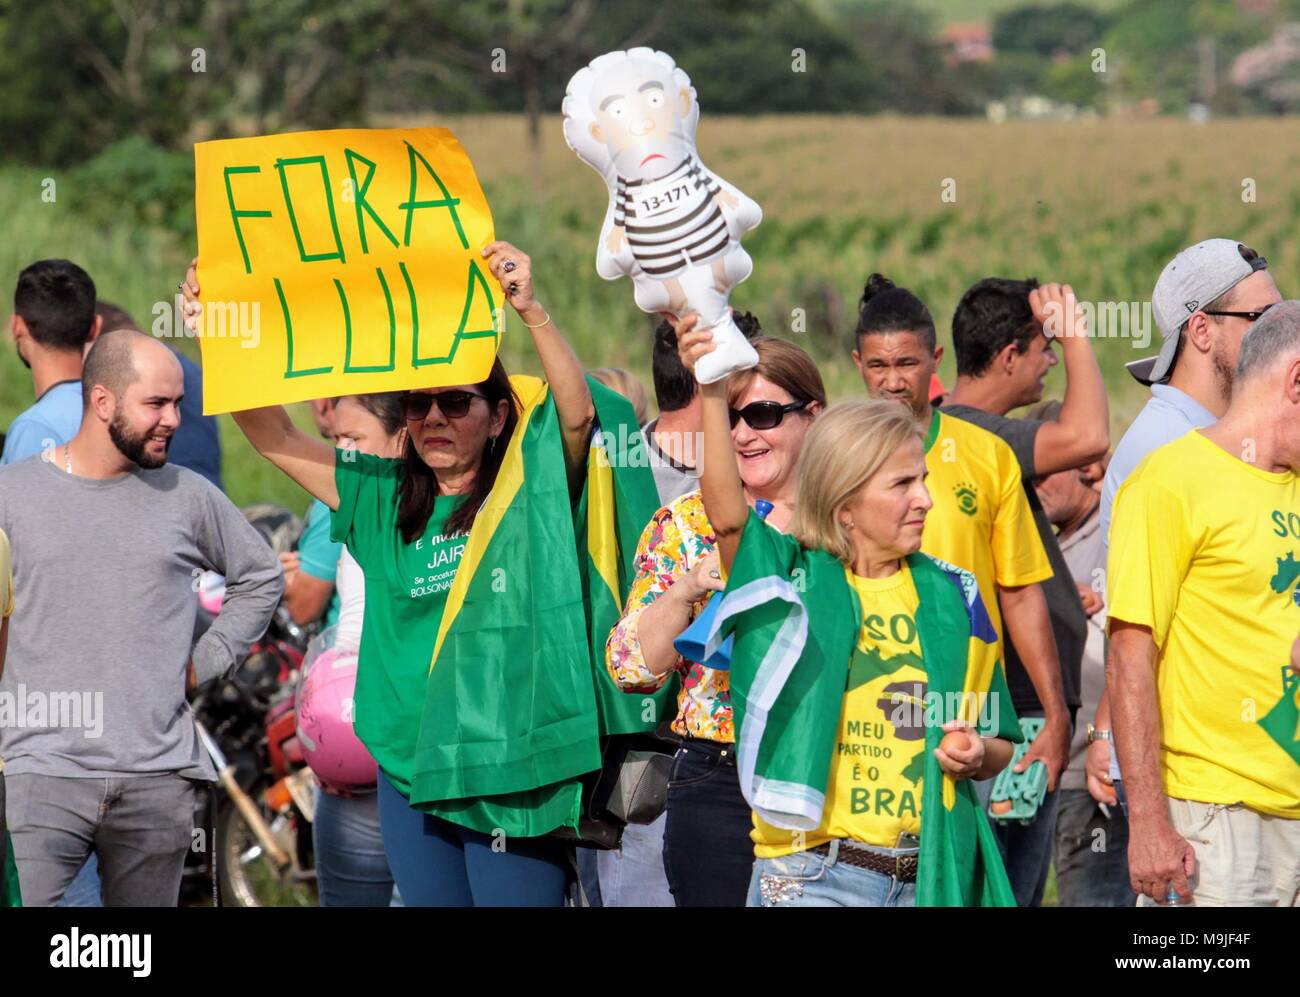 FOZ DO IGUAÇU, PR - 26.03.2018: CARAVANA LULA EM FOZ DO IGUAÇU PR - Former President Luiz Inácio da Silva arrived in Foz do Iguaçu amid threats and protests. Before the former president&#3participatipation there was confrontation of anti-Lula demonstrators with the Miry Police. Morale bombs and and rubber bullets were used to disperse protesters. Lula participated in the International Seminar of the Triple Border at the Foz do Iguaçu Electricity Trade Union (Sinefi). The theme in question is education and integration between Latin American countries and has a special meaning for the former pre Stock Photo